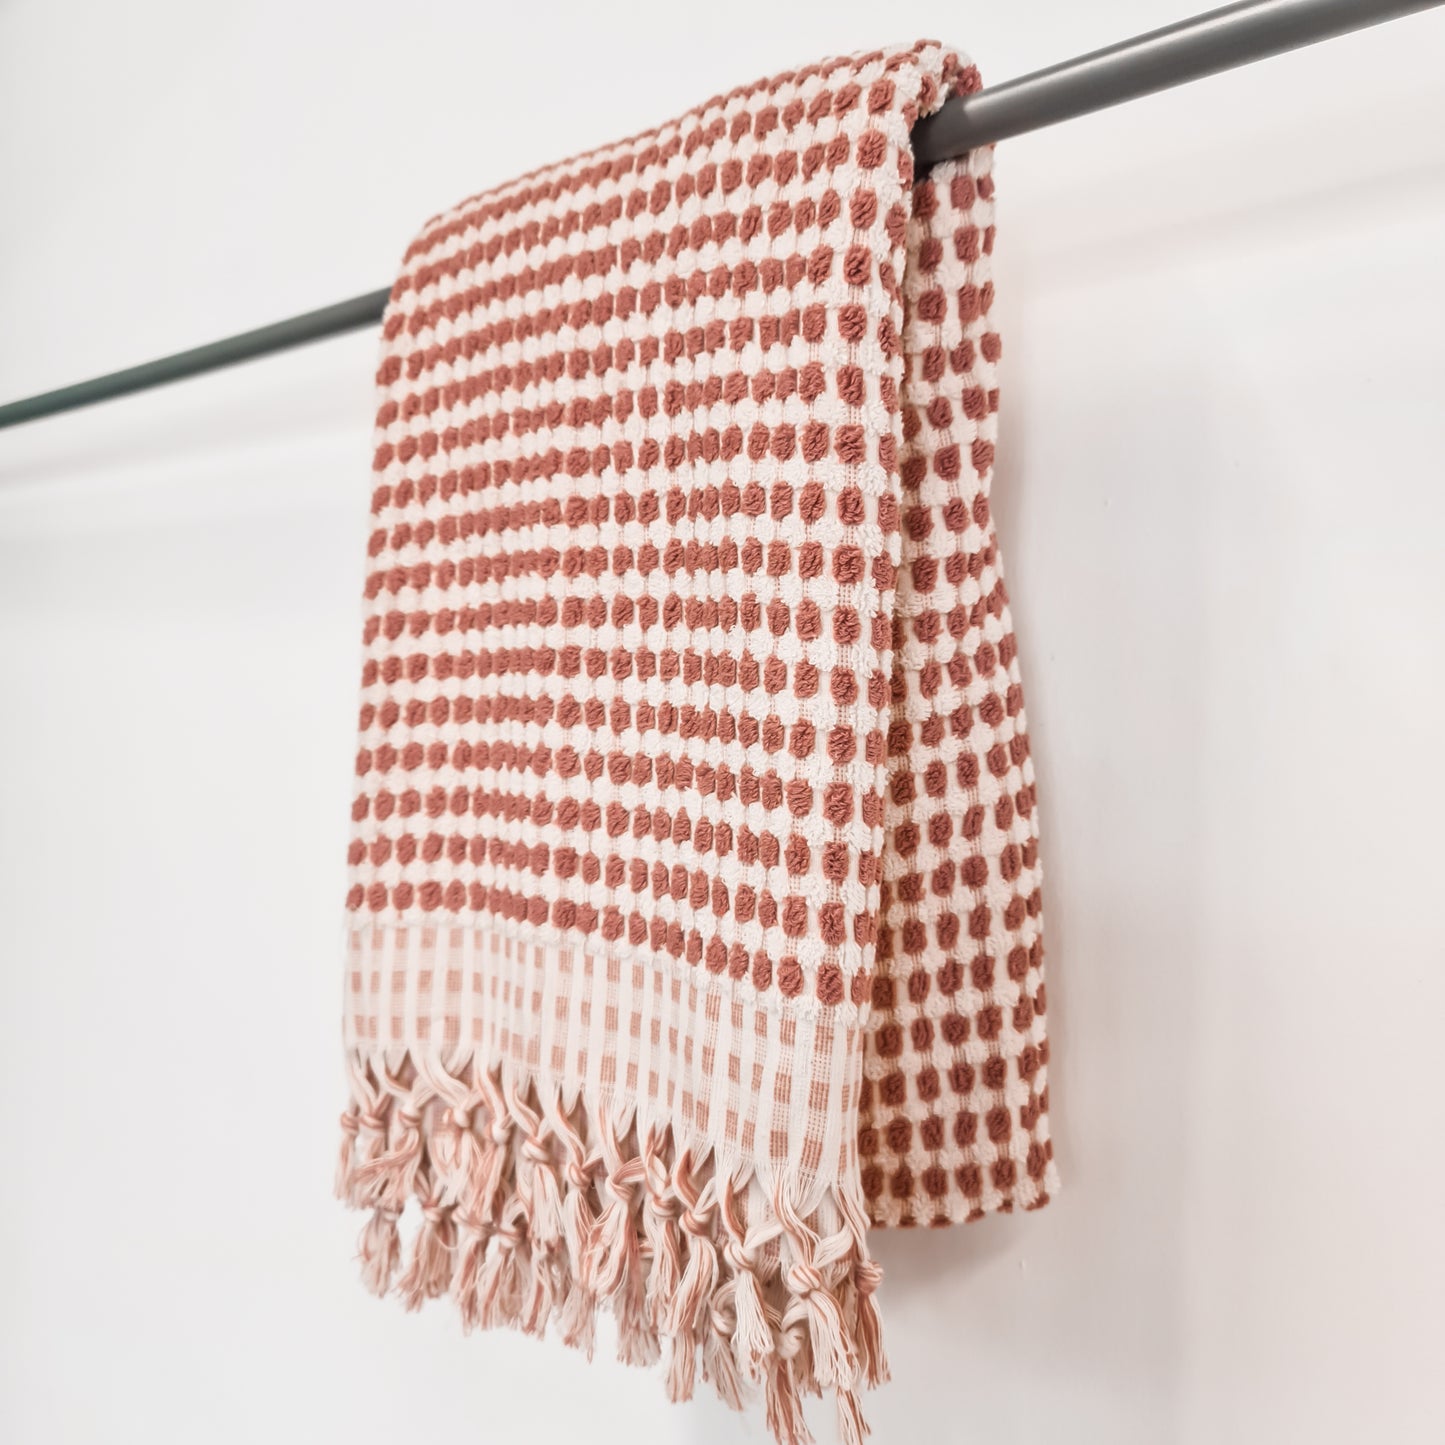 Turkish Hammam Bath Terry Towels Rose Dotted